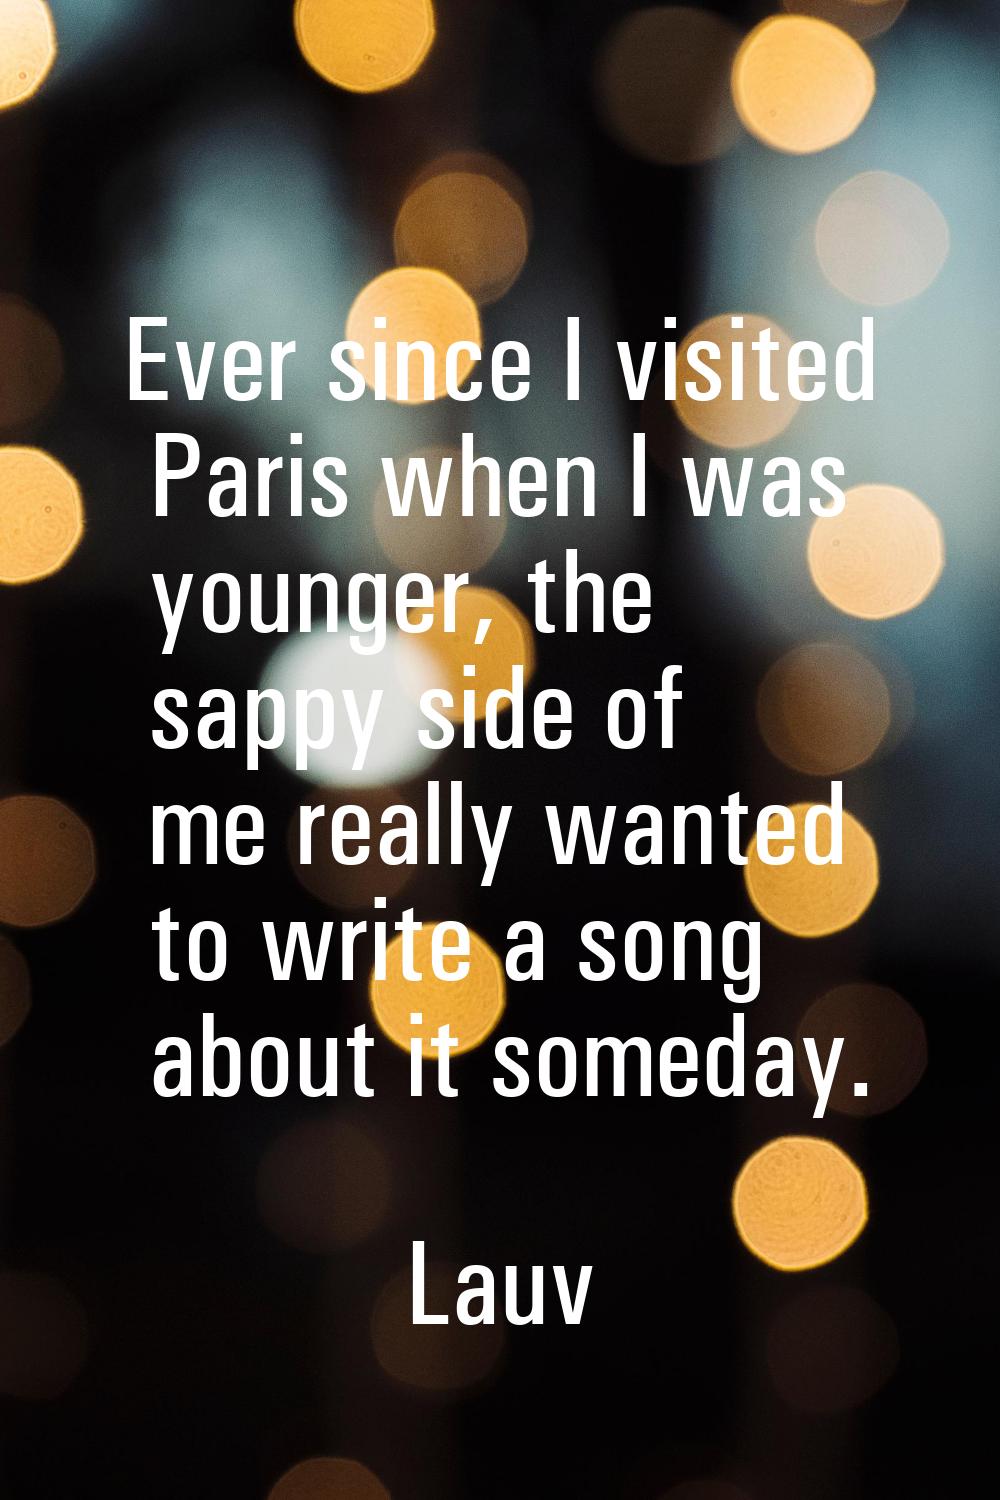 Ever since I visited Paris when I was younger, the sappy side of me really wanted to write a song a